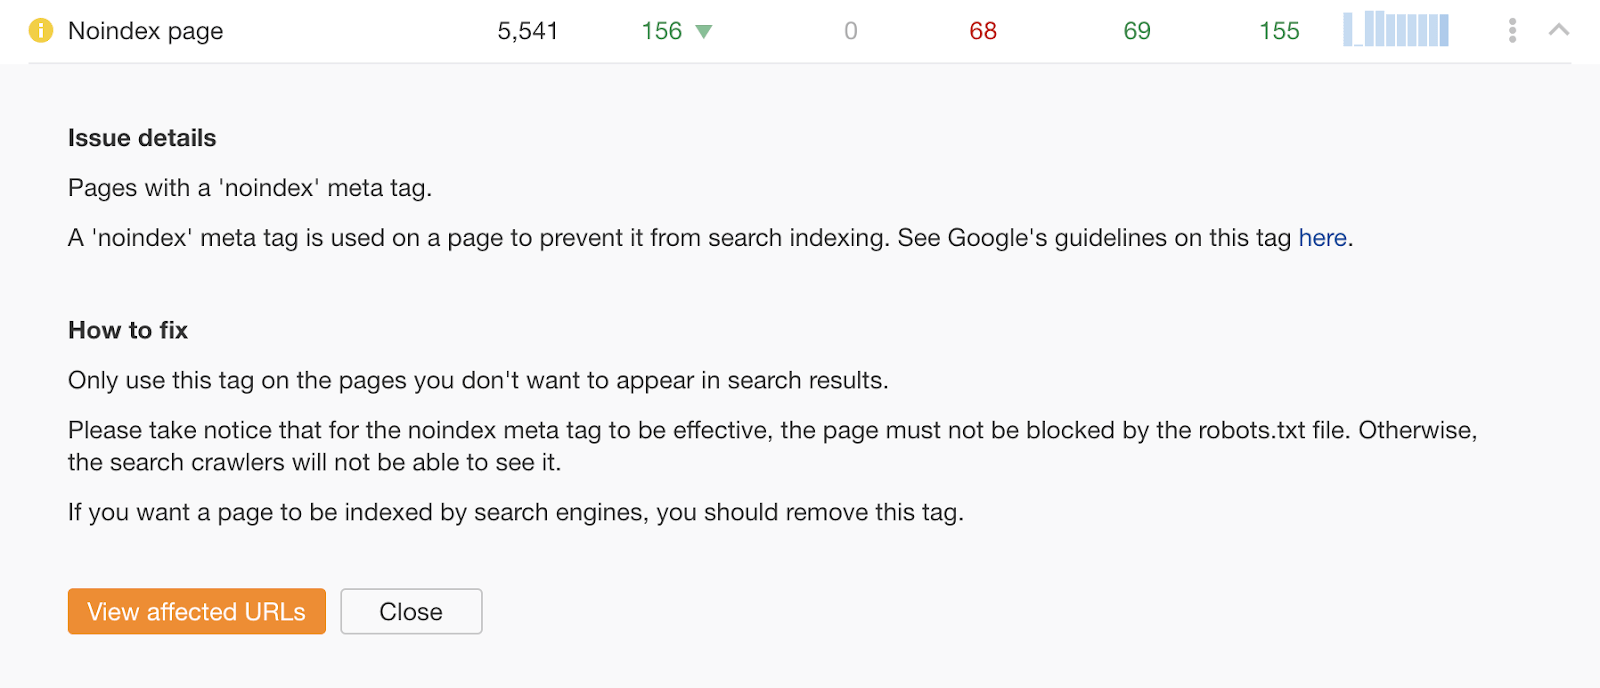 Page showing "Noindex" meta tag issue and explanation of how to fix it